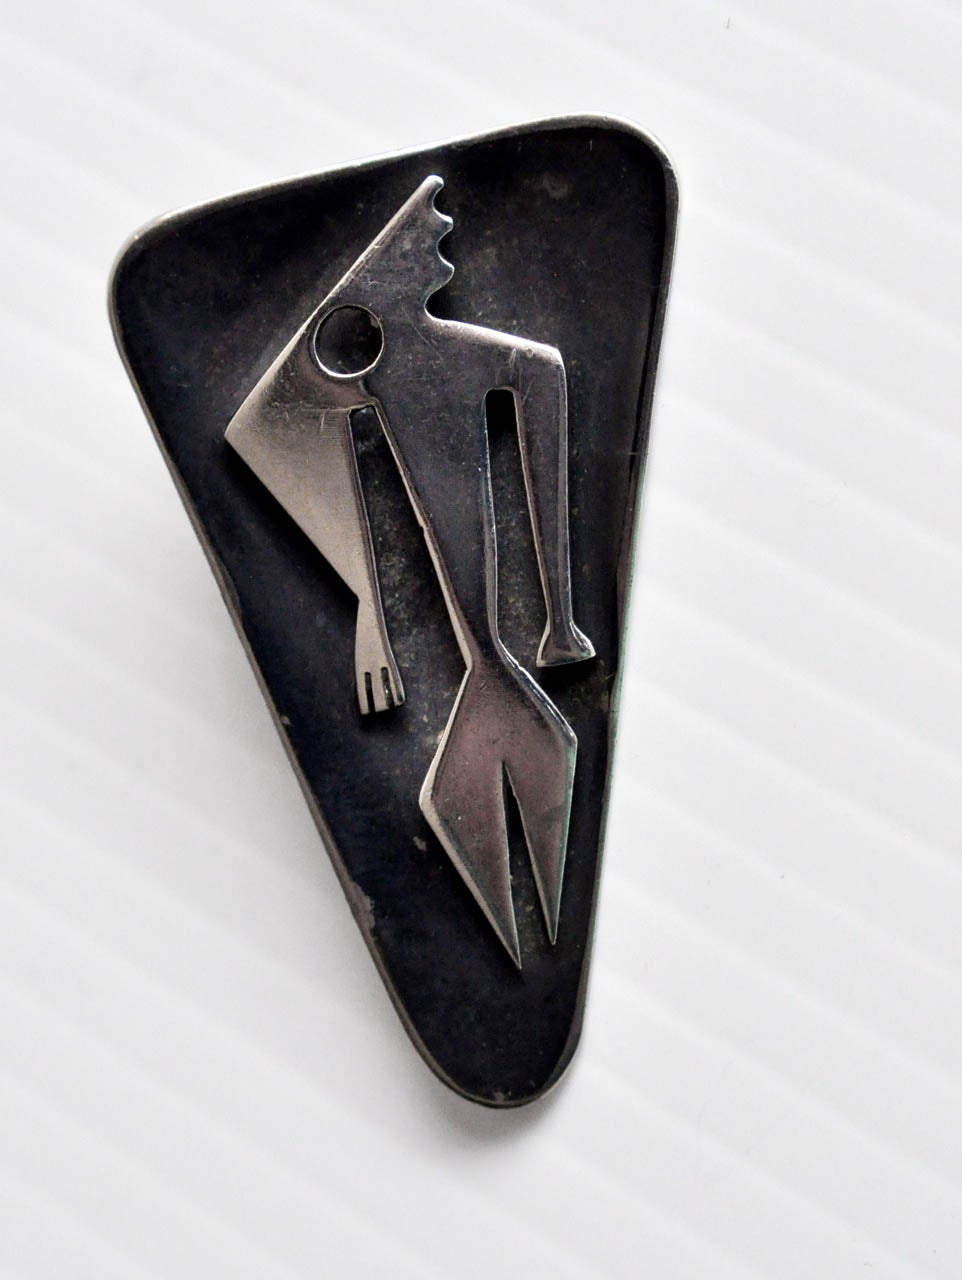 A sculptural sterling silver pendant by Ed Wiener reflecting the artist's interest in primitive imagery.

Reference:  Jewelry by Ed Wiener (definitive catalog on Ed Wiener published in conjunction with the retrospective exhibition
